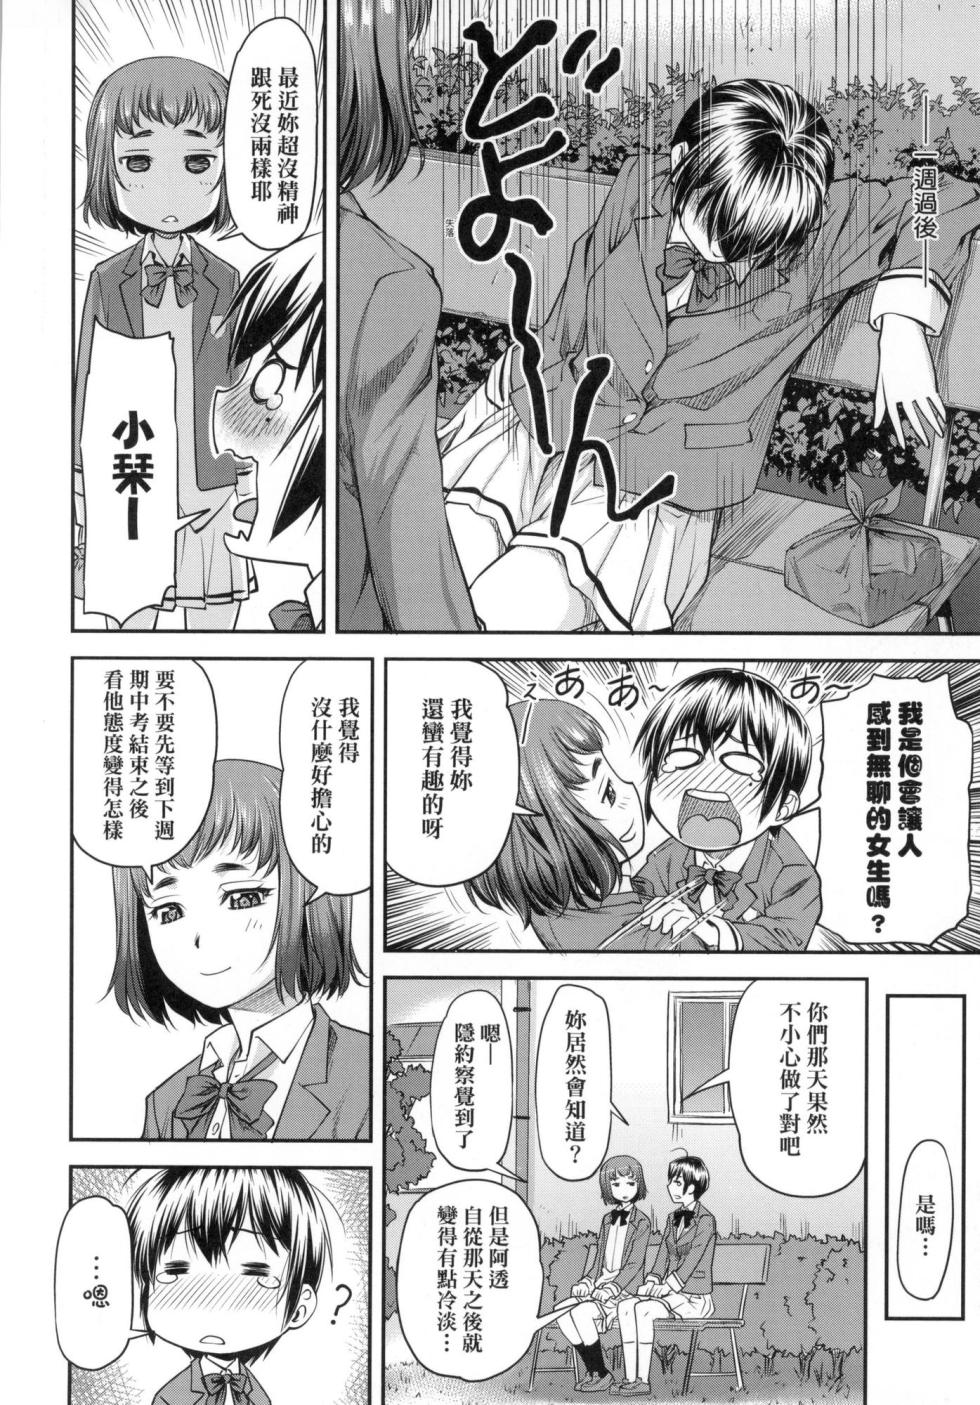 [Nagare Ippon] Kaname Date Jou | 小要開發Date 上 [Chinese] [Decensored] - Page 33